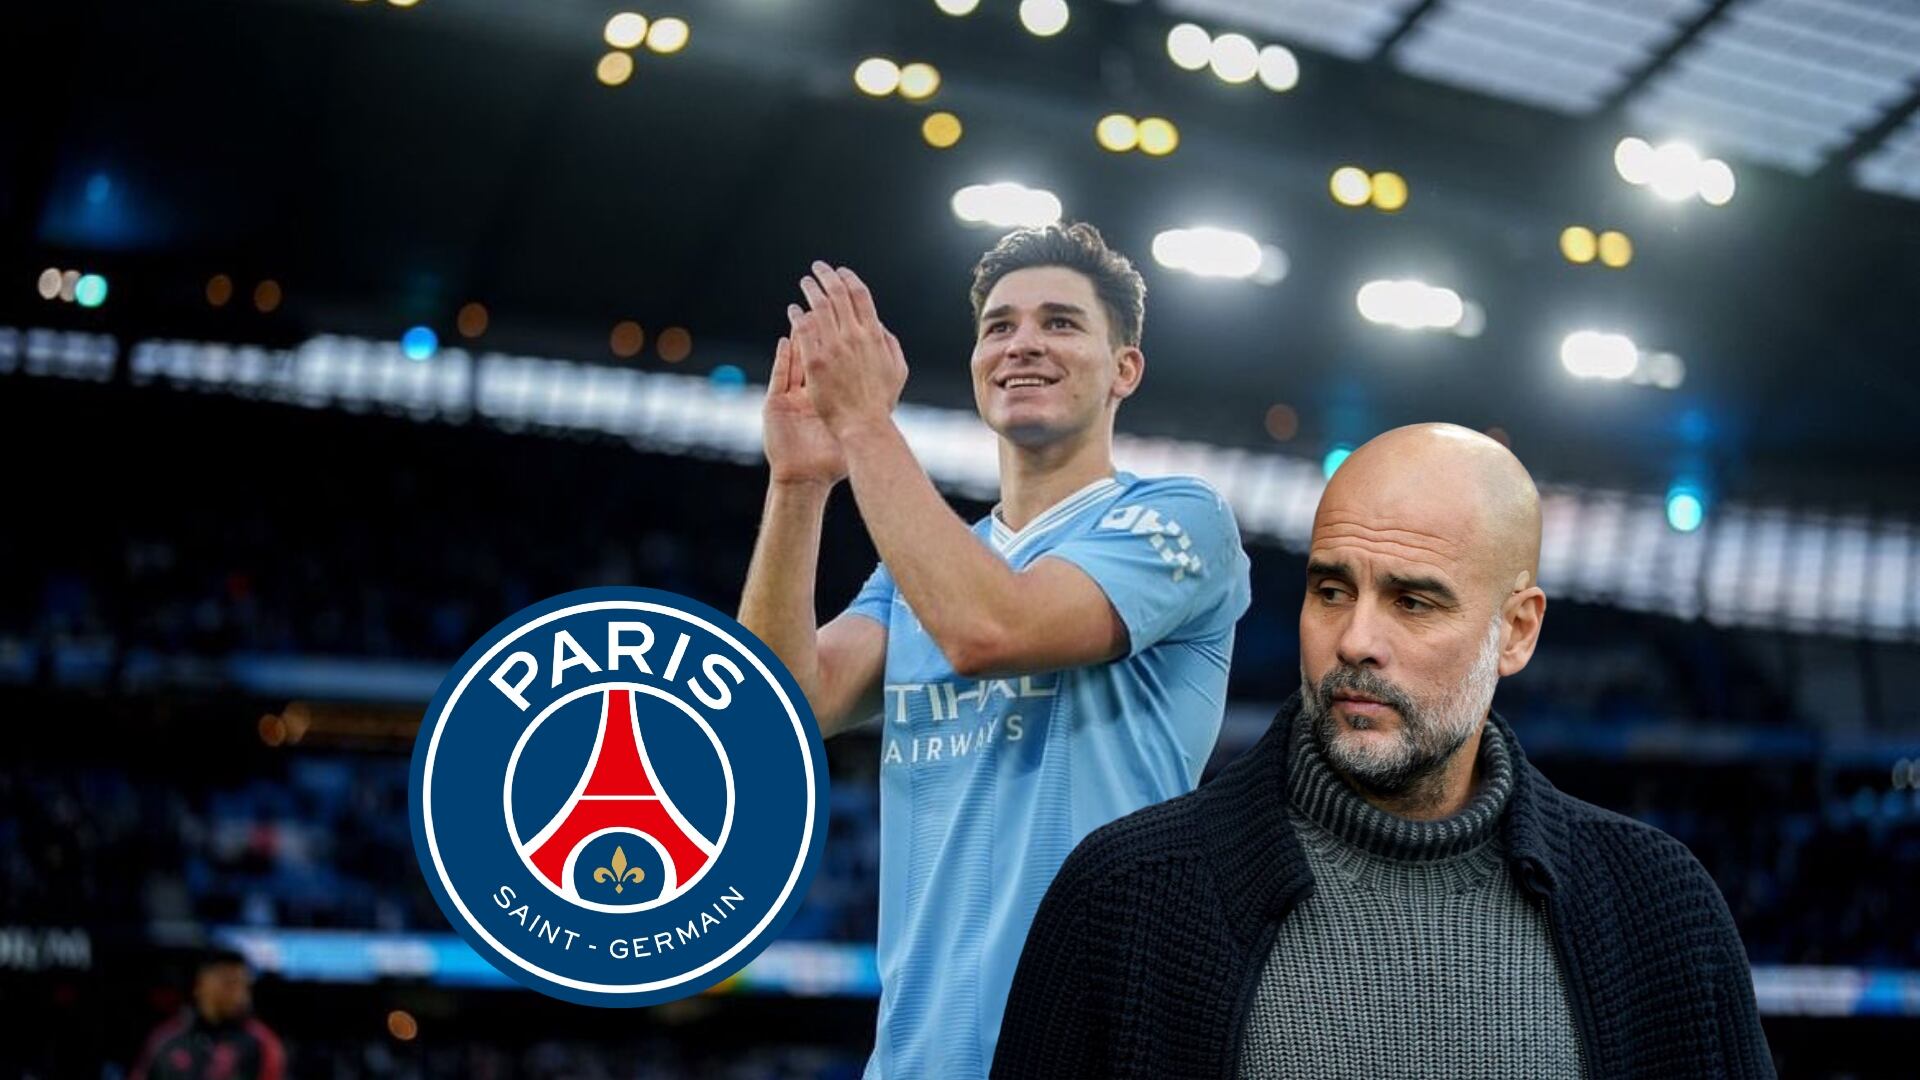 The price for which PSG will want to take Julian Alvarez away from Guardiola and Man City